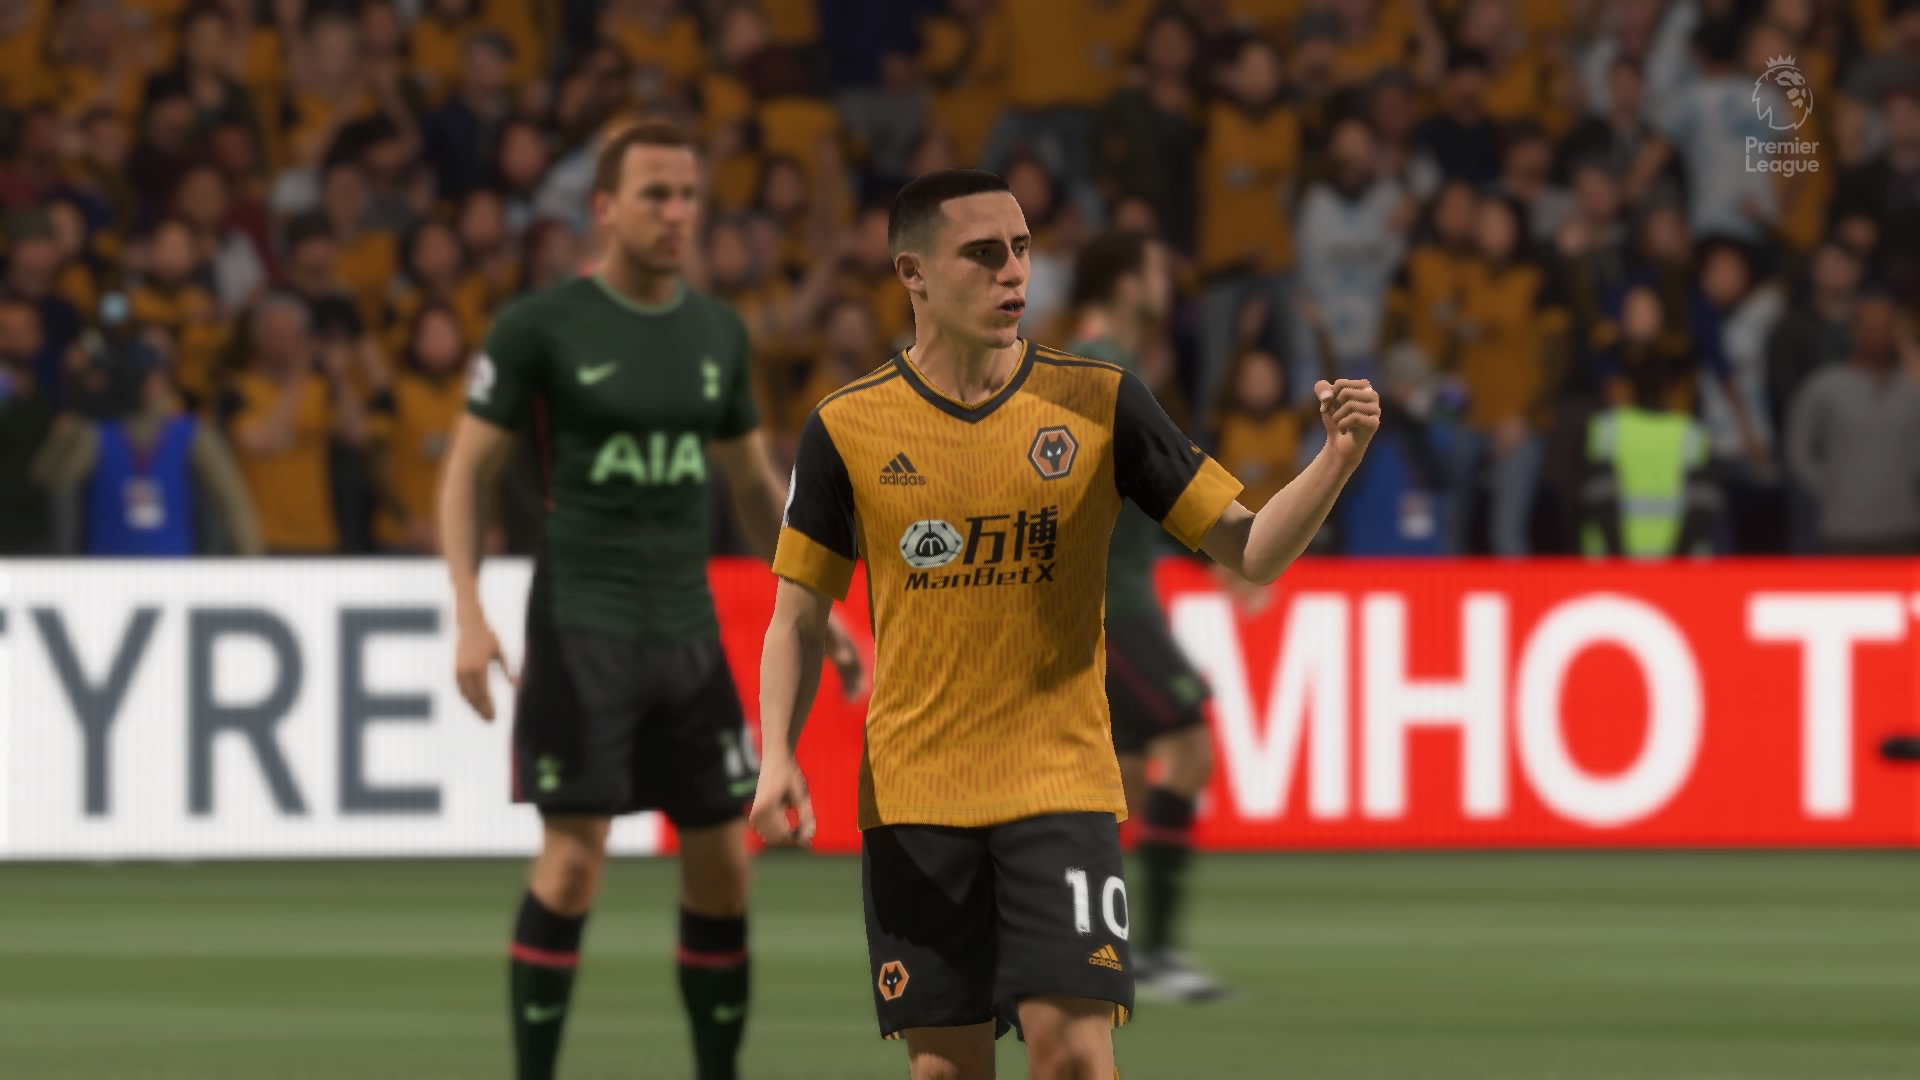 Best FIFA 21 Nickname cards: Wolves players, with one at the center of the image celebrating with one hand clenched in a fist.